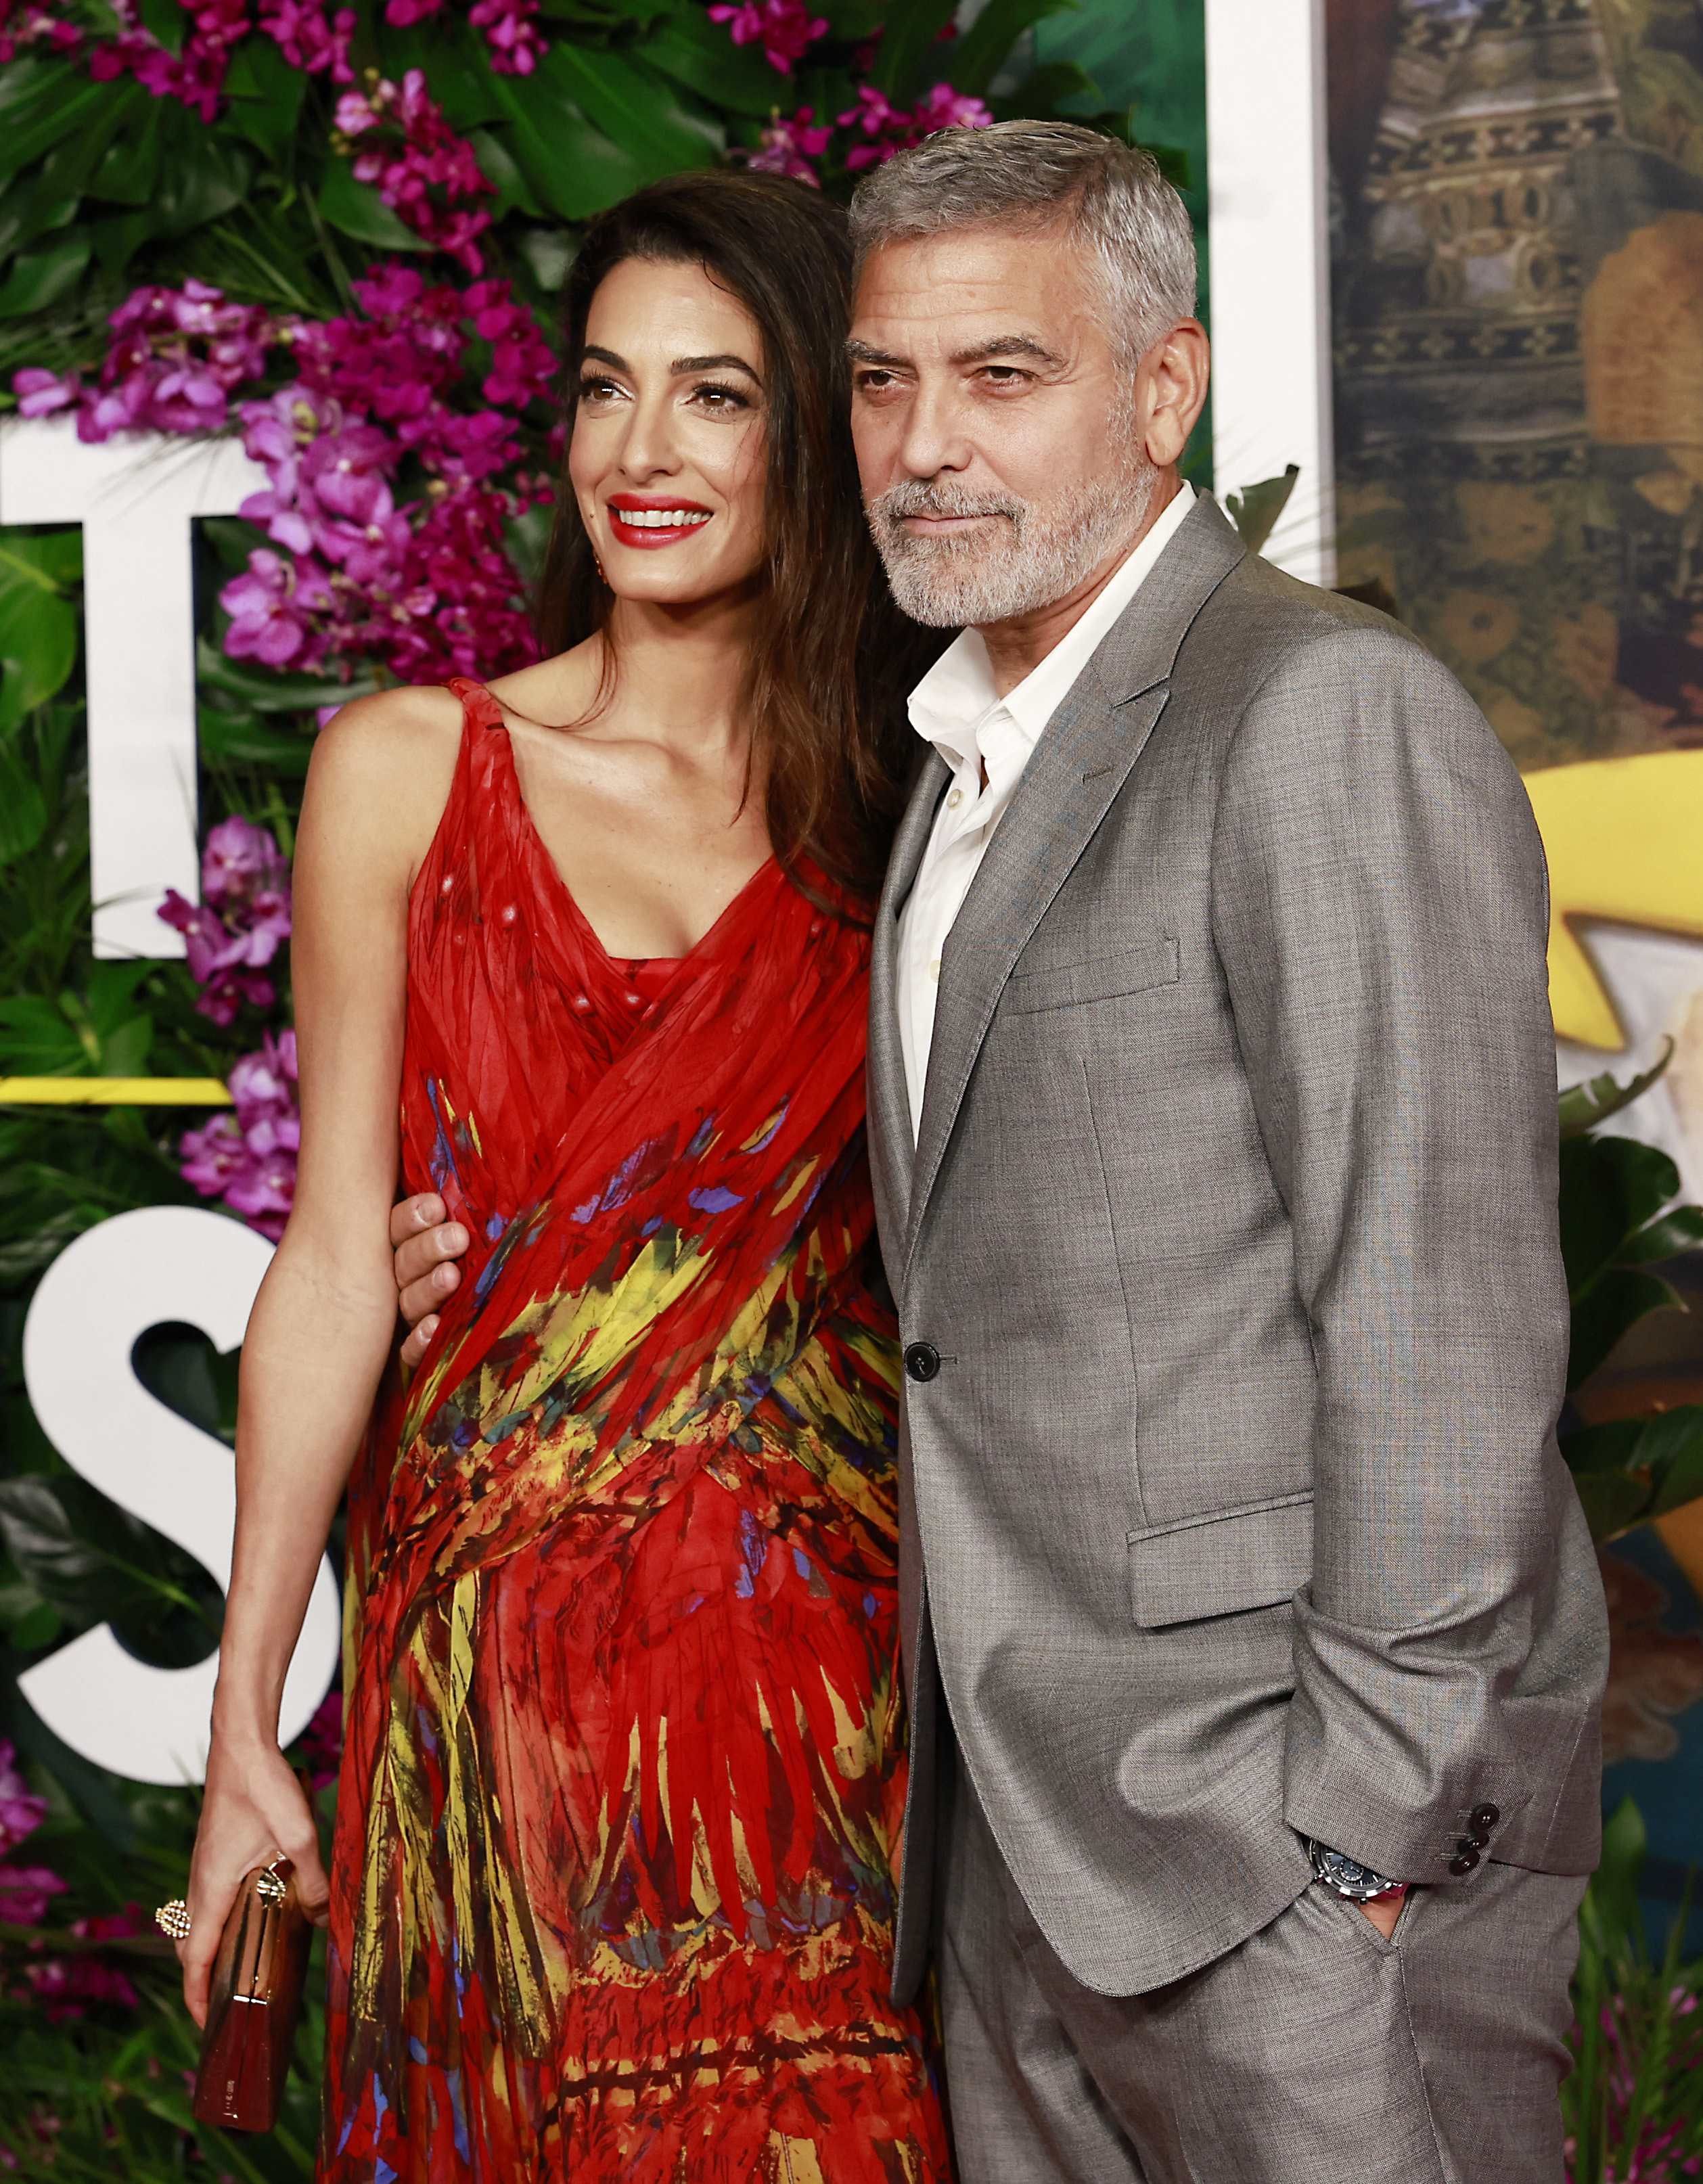 Lebanese-British barrister Amal Clooney (L) and US actor George Clooney arrive for the premiere of "Ticket to Paradise" at the Regency Village Theatre. in Westwood, California, on October 17, 2022. | Source: Getty Images